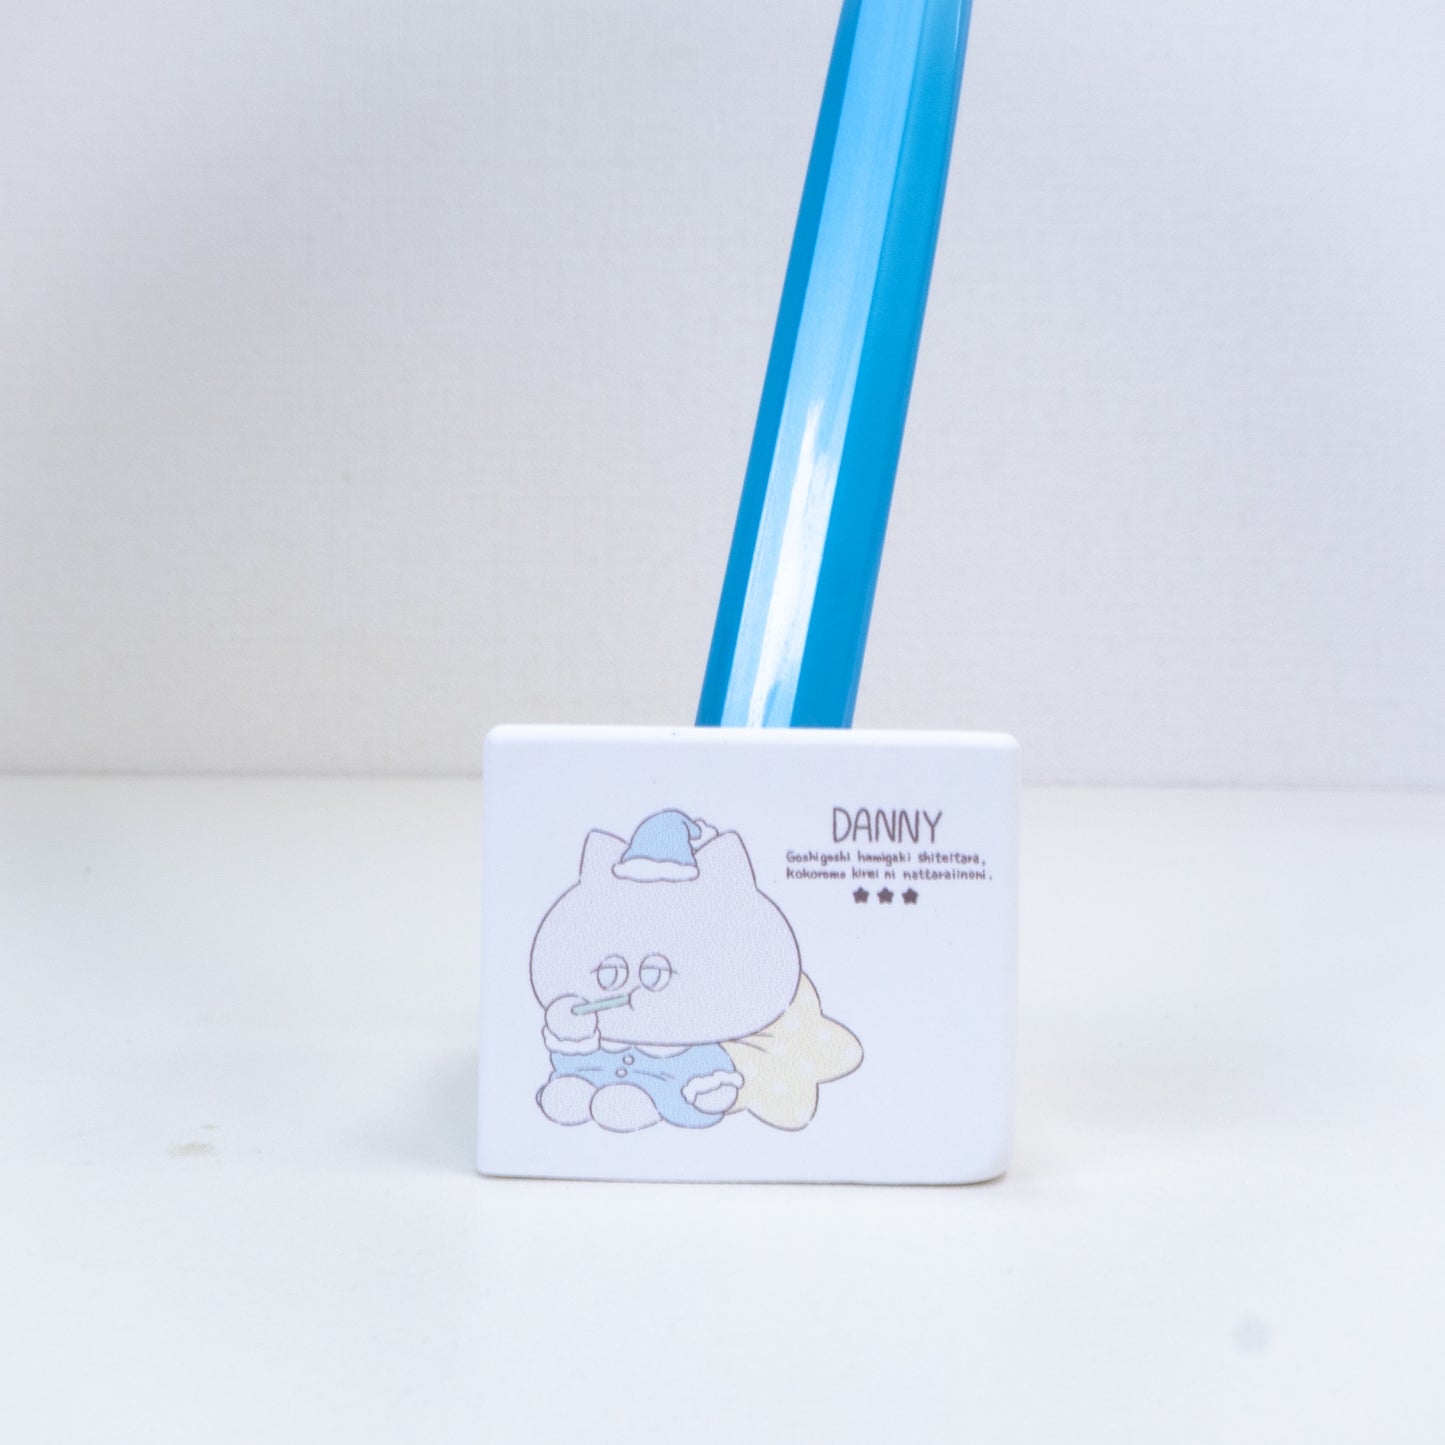 [Asamimi-chan] Diatomaceous earth toothbrush stand [shipped in early October]